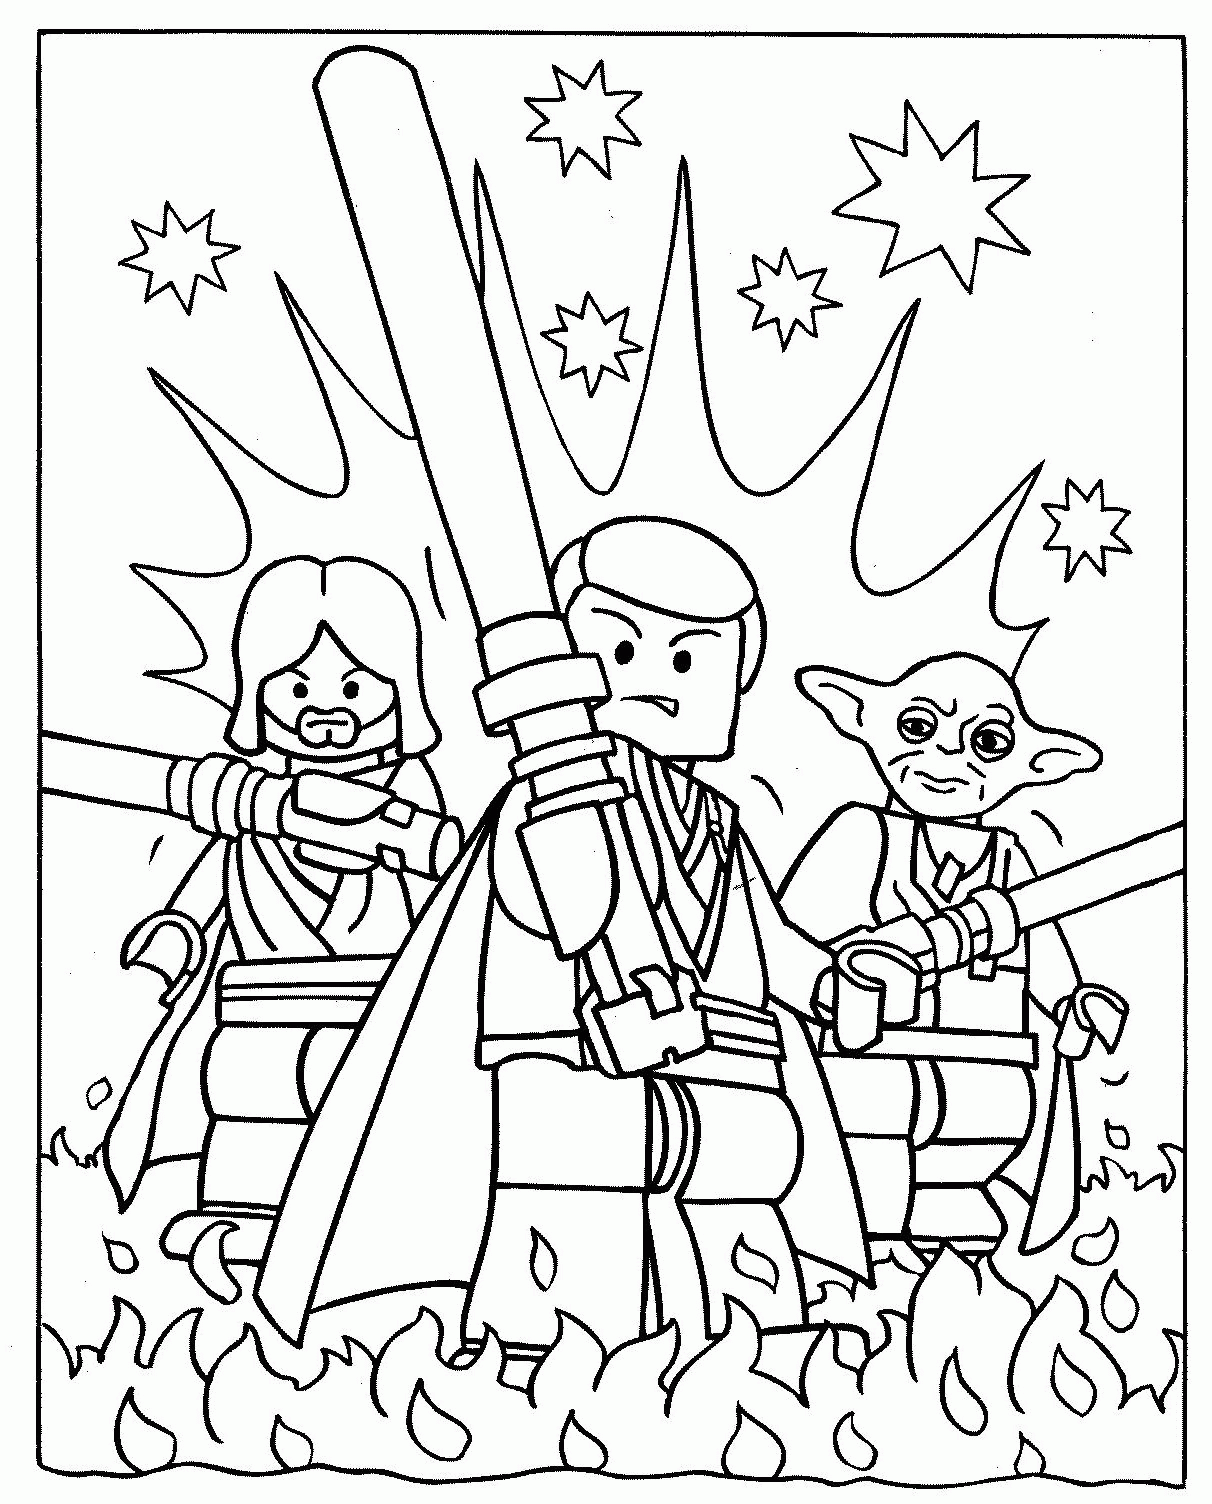 Obi Wan And Luke Skywalker With Yoda Coloring Pages Coloring Pages ...